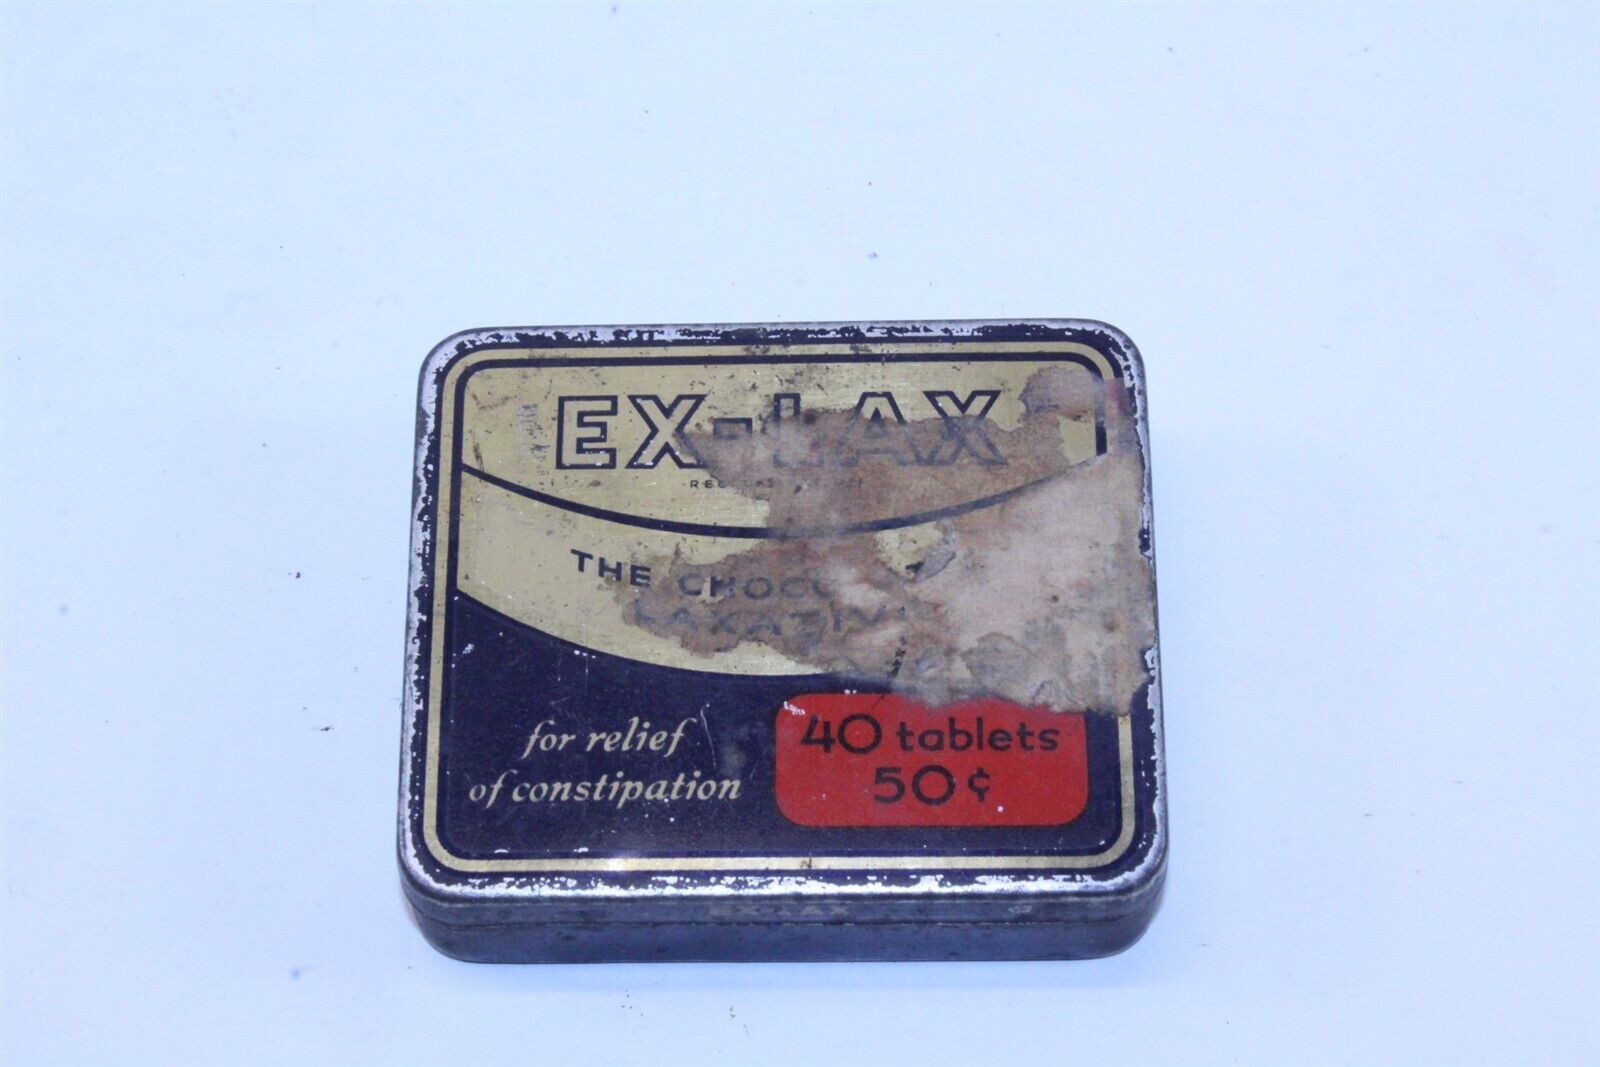  Ex-Lax Advertising Tin with Quill tips & Razor Blade Collectibles Vintage